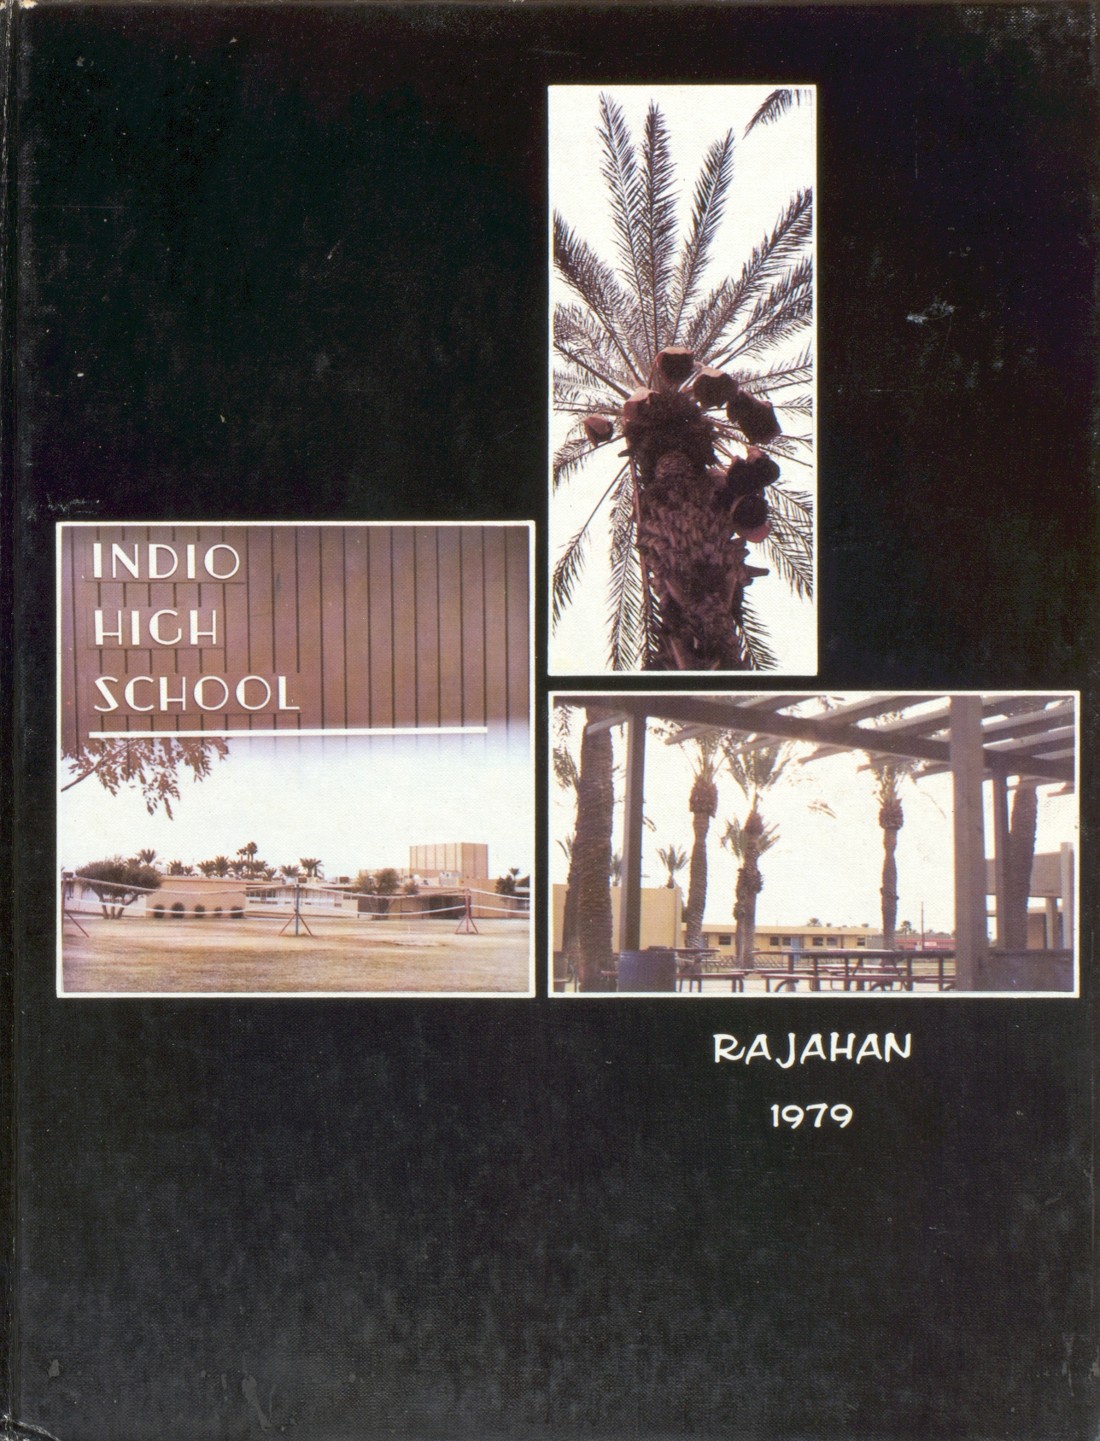 1979 yearbook from Indio High School from Indio, California